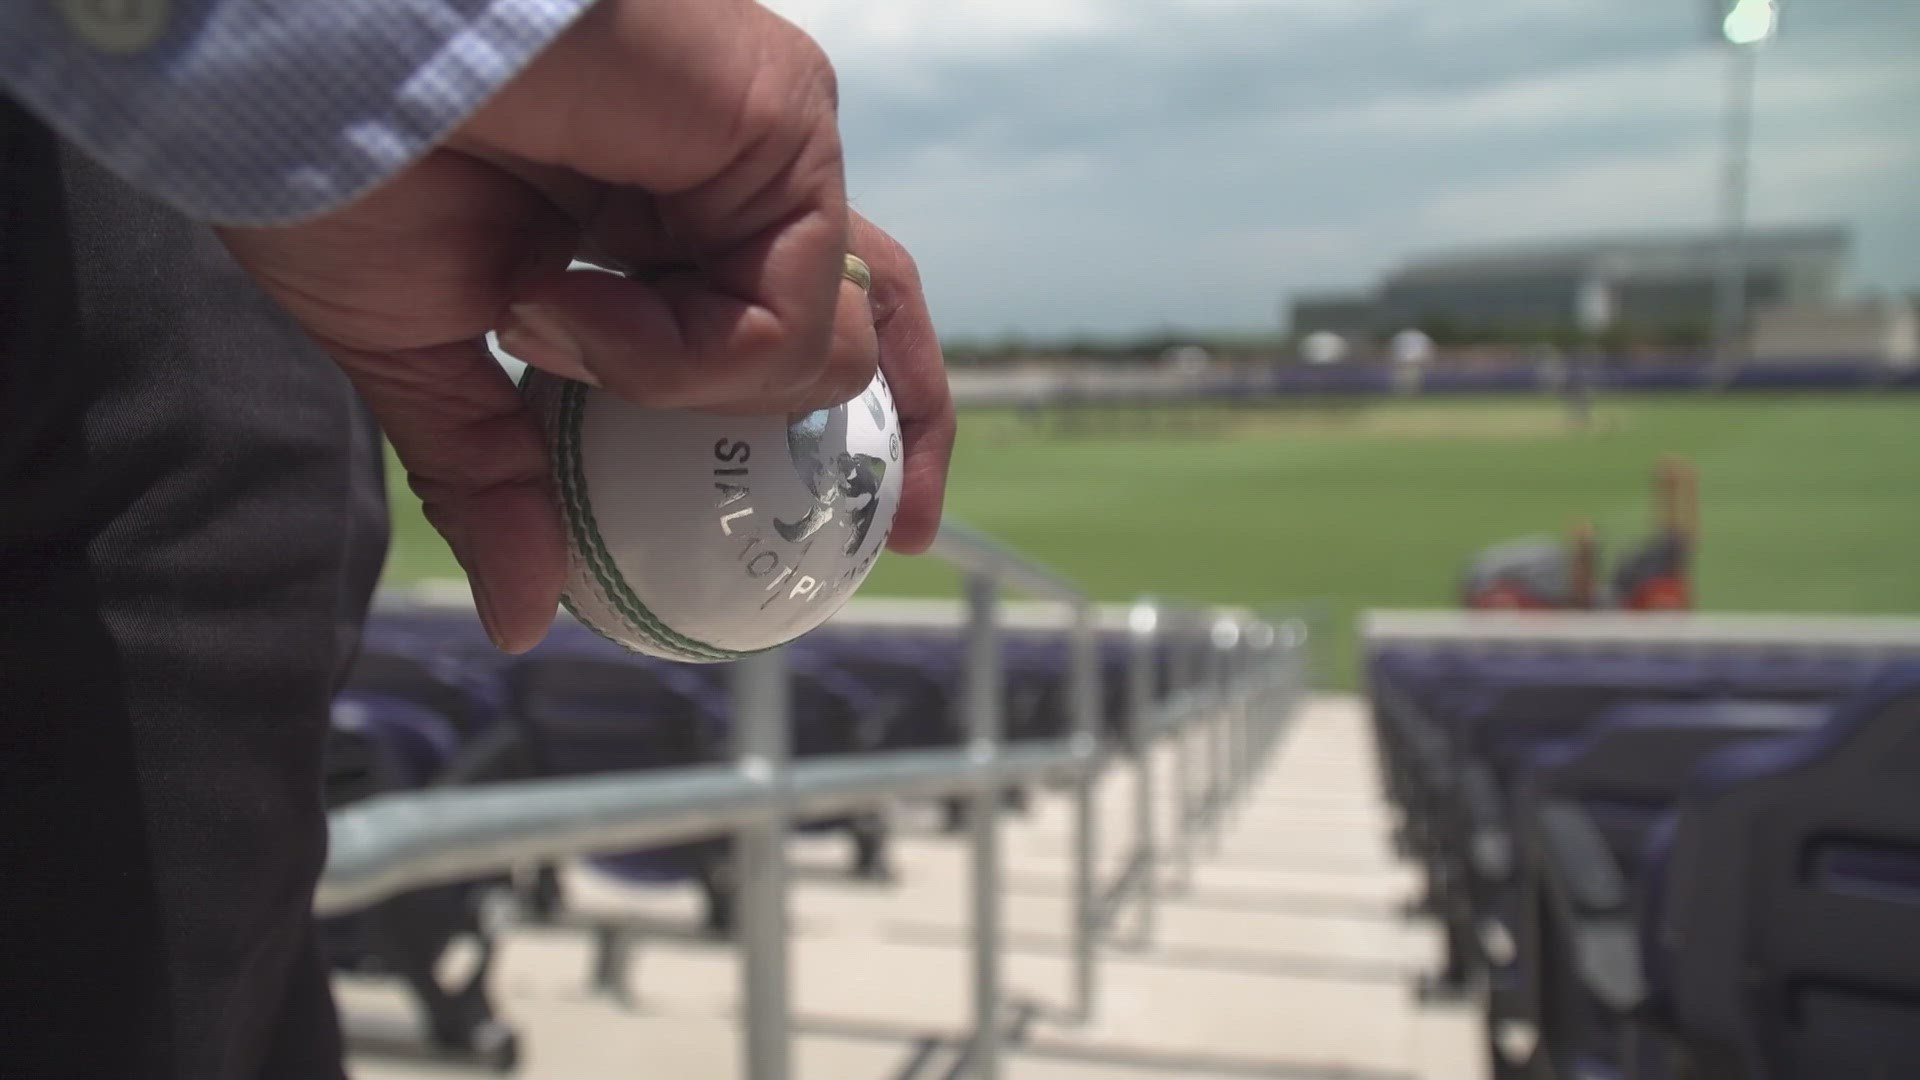 Grand Prairie Stadium is set to host the first-ever cricket league in the U.S.